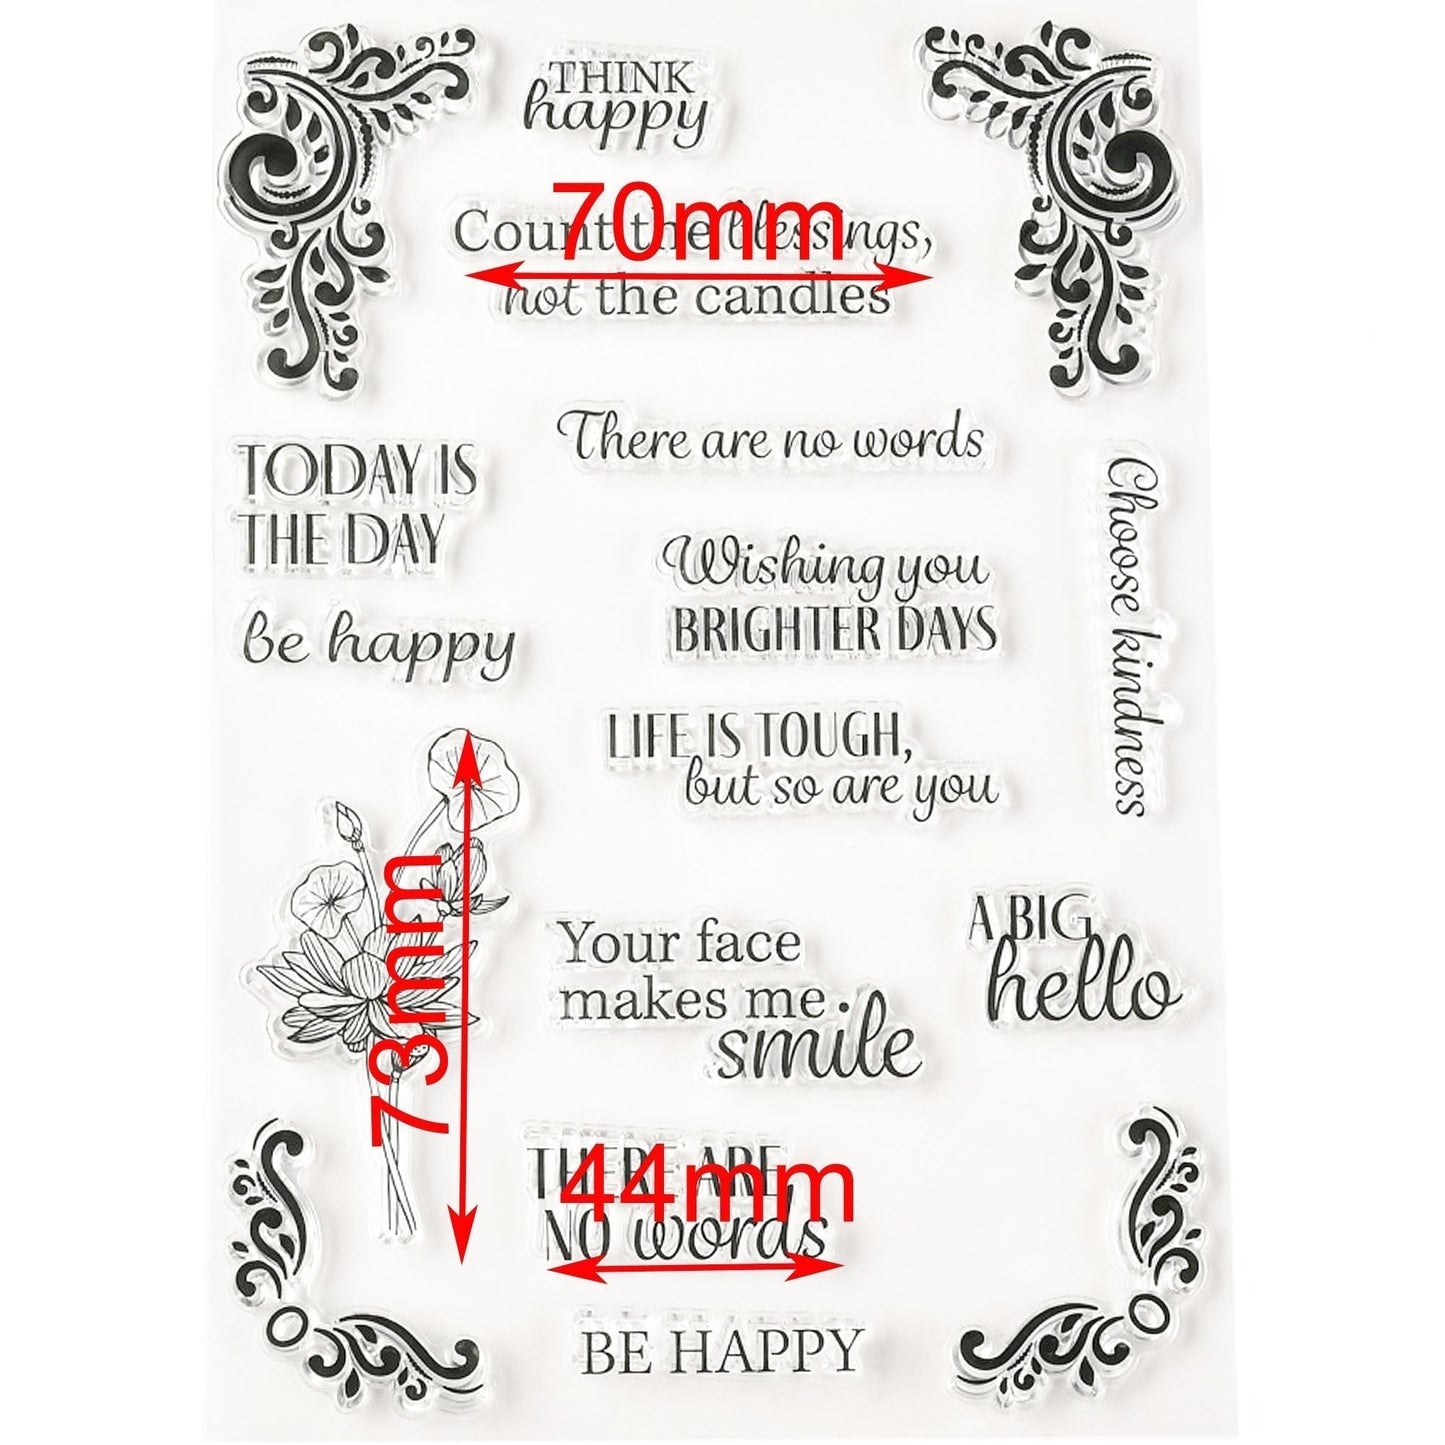 Count the Blessings Message Clear Stamp Silicone Rubber Scrapbooking Card Making